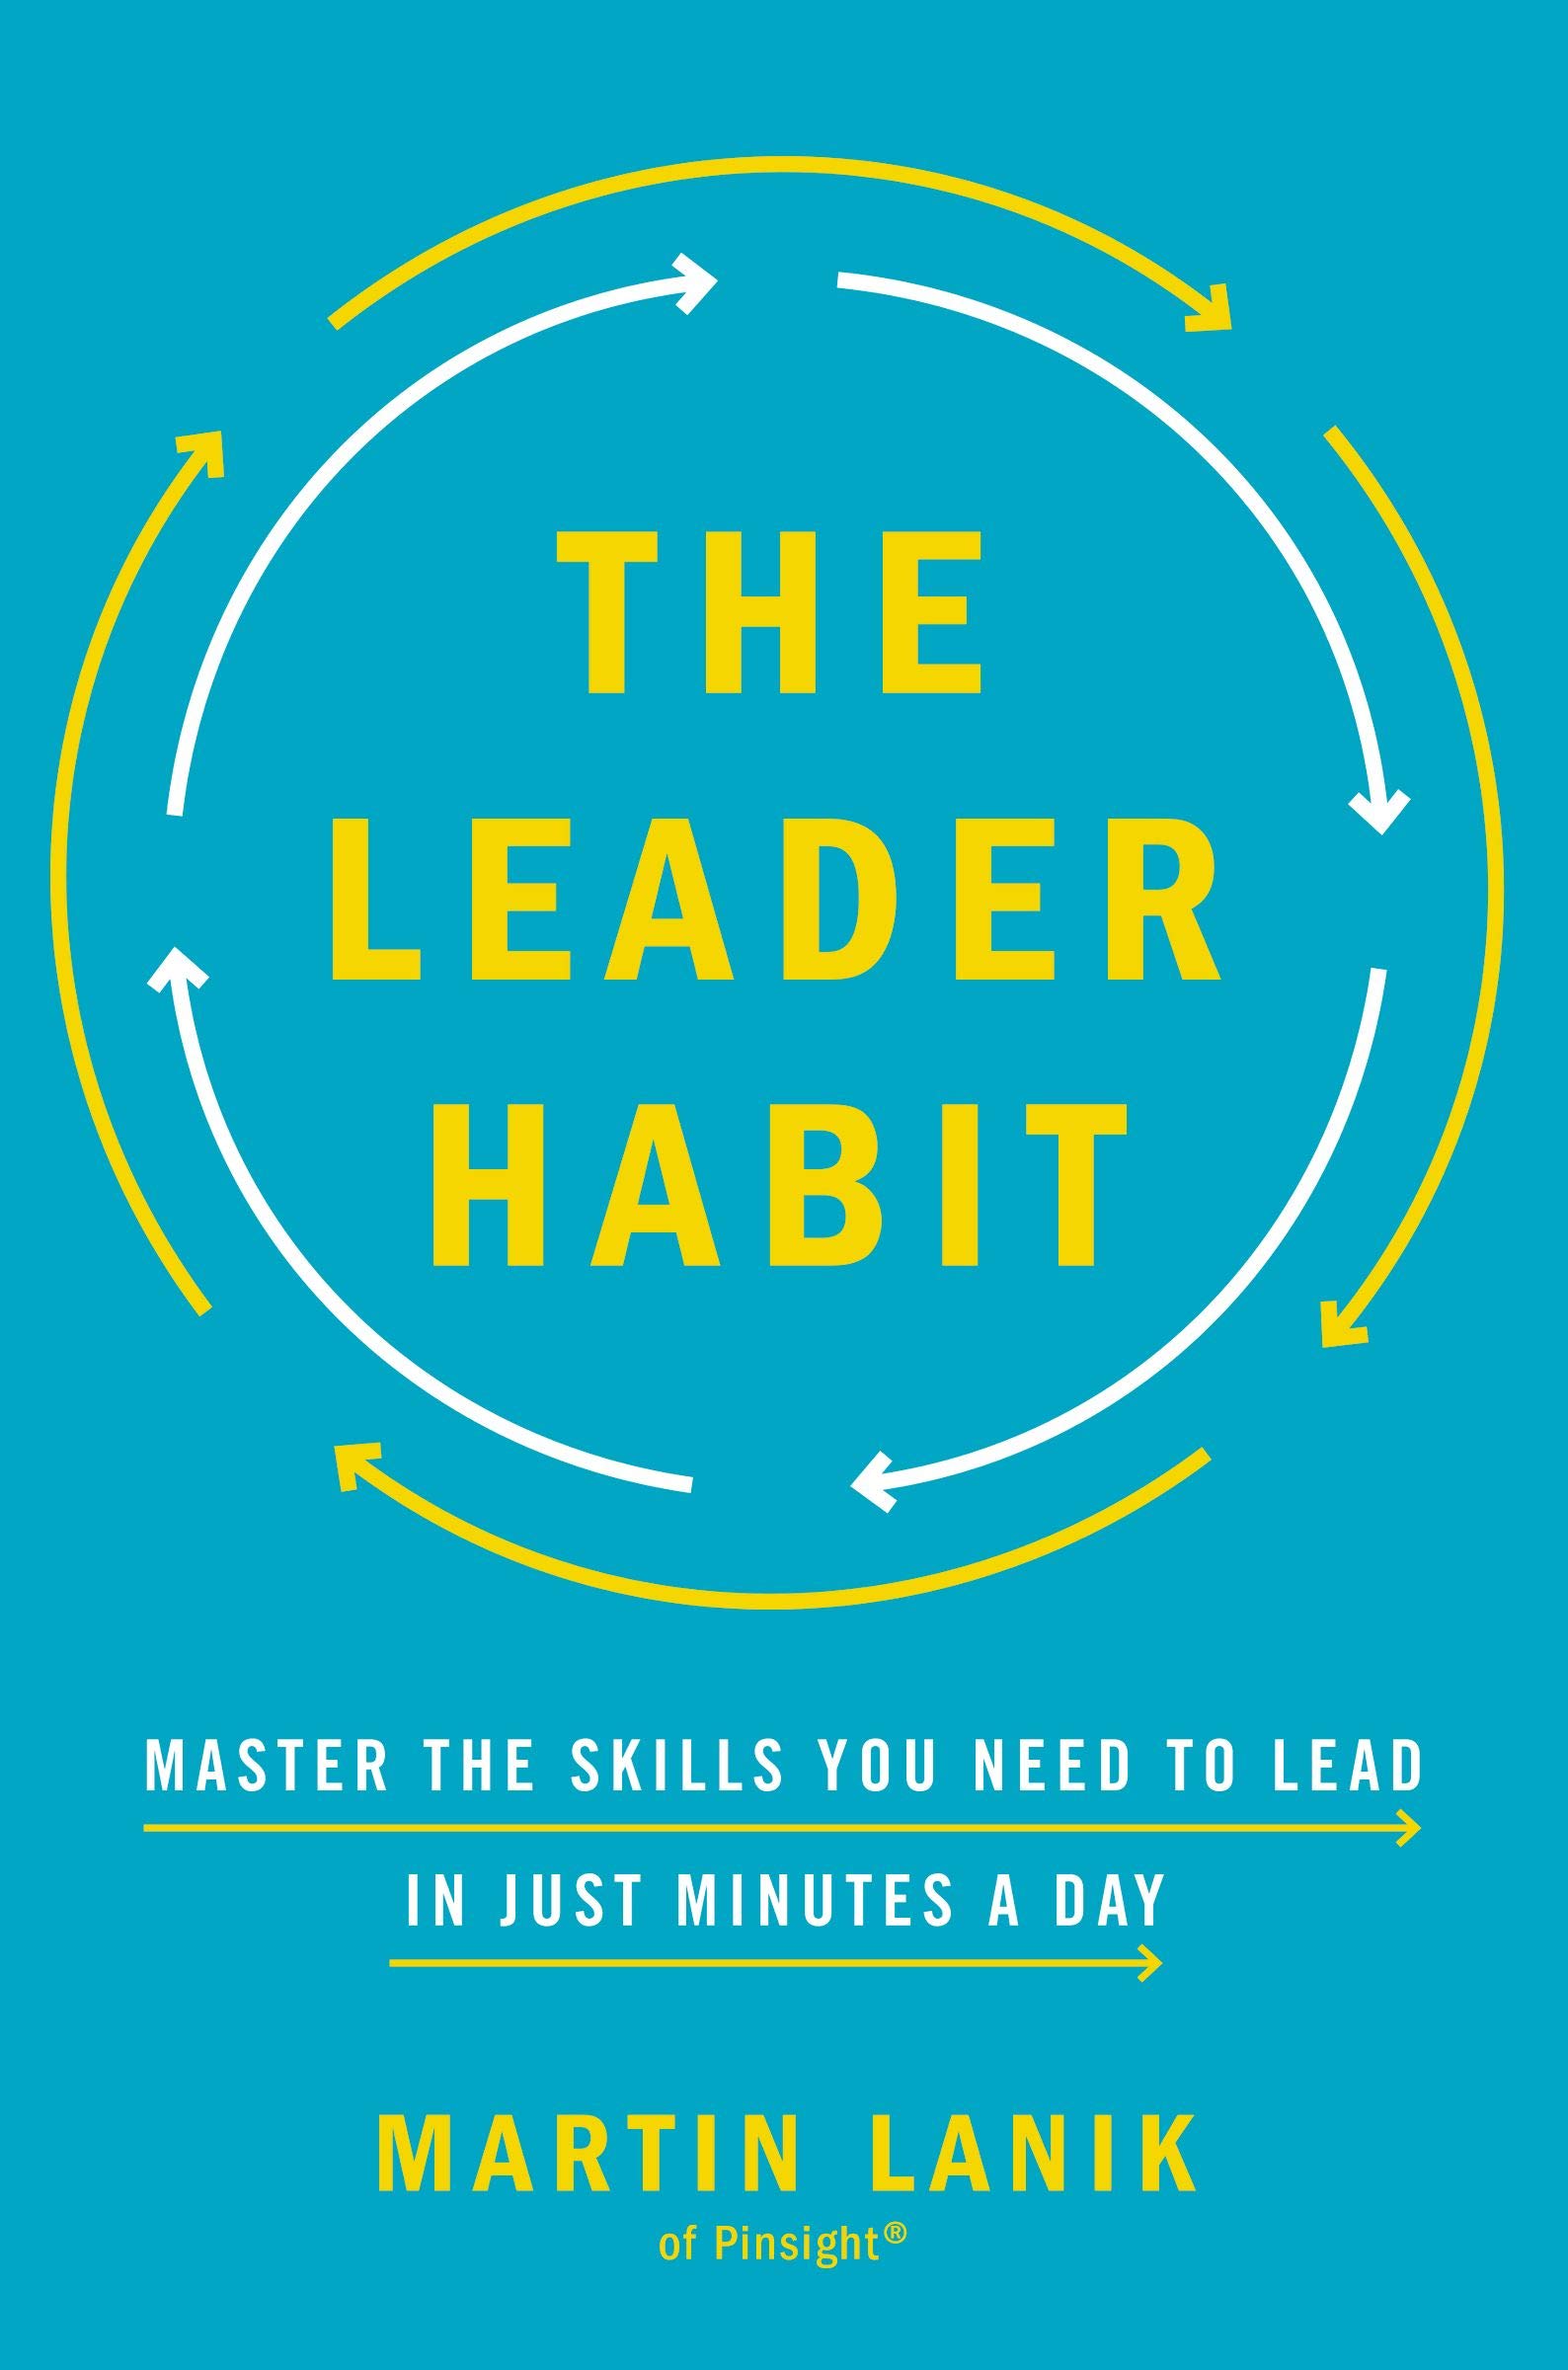 The leader habit : master the skills you need to lead in just minutes a day